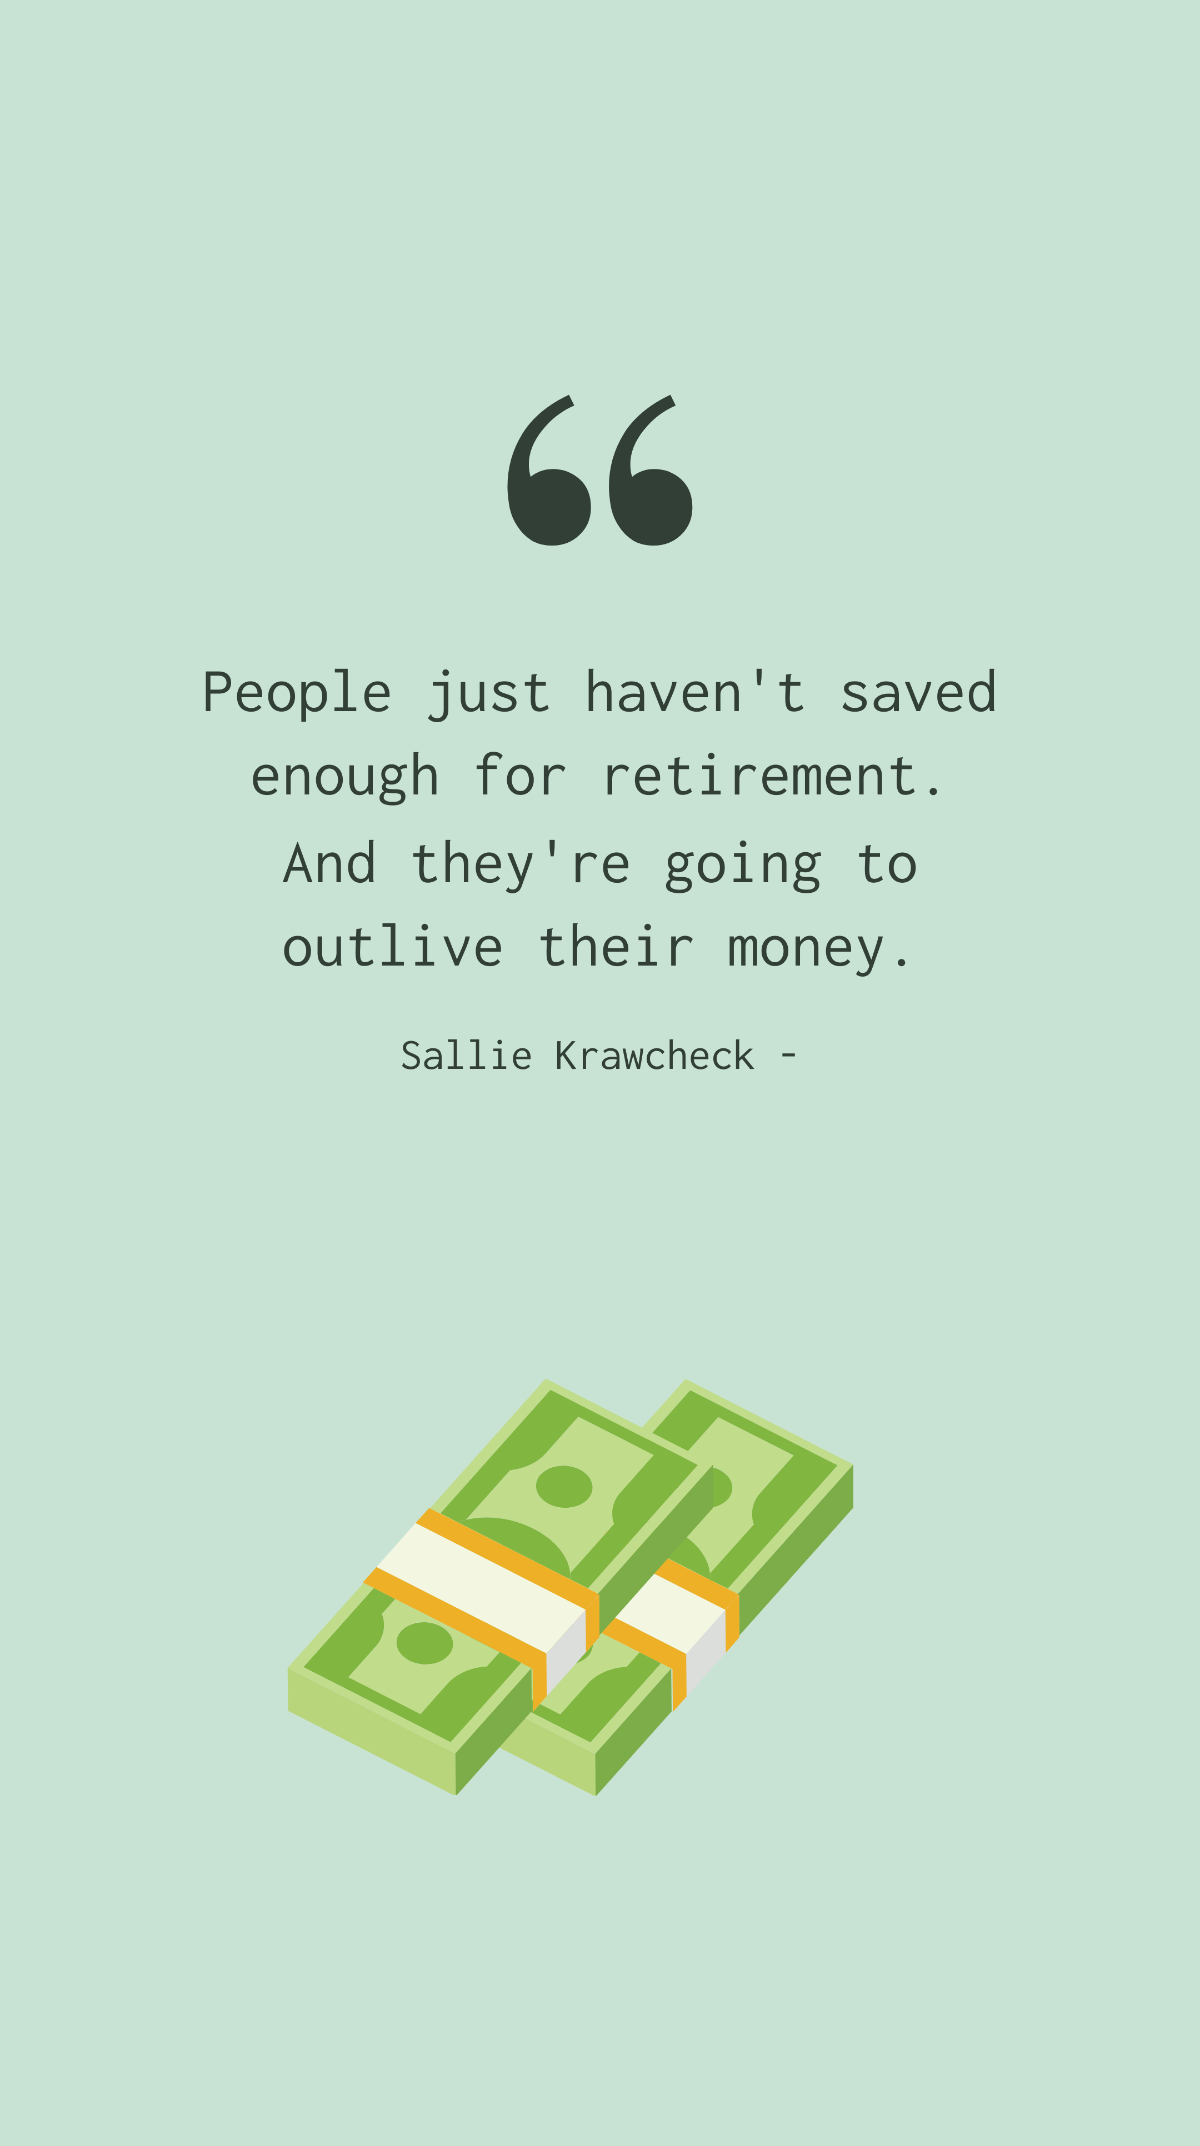 Free Sallie Krawcheck - People just haven't saved enough for retirement. And they're going to outlive their money. Template